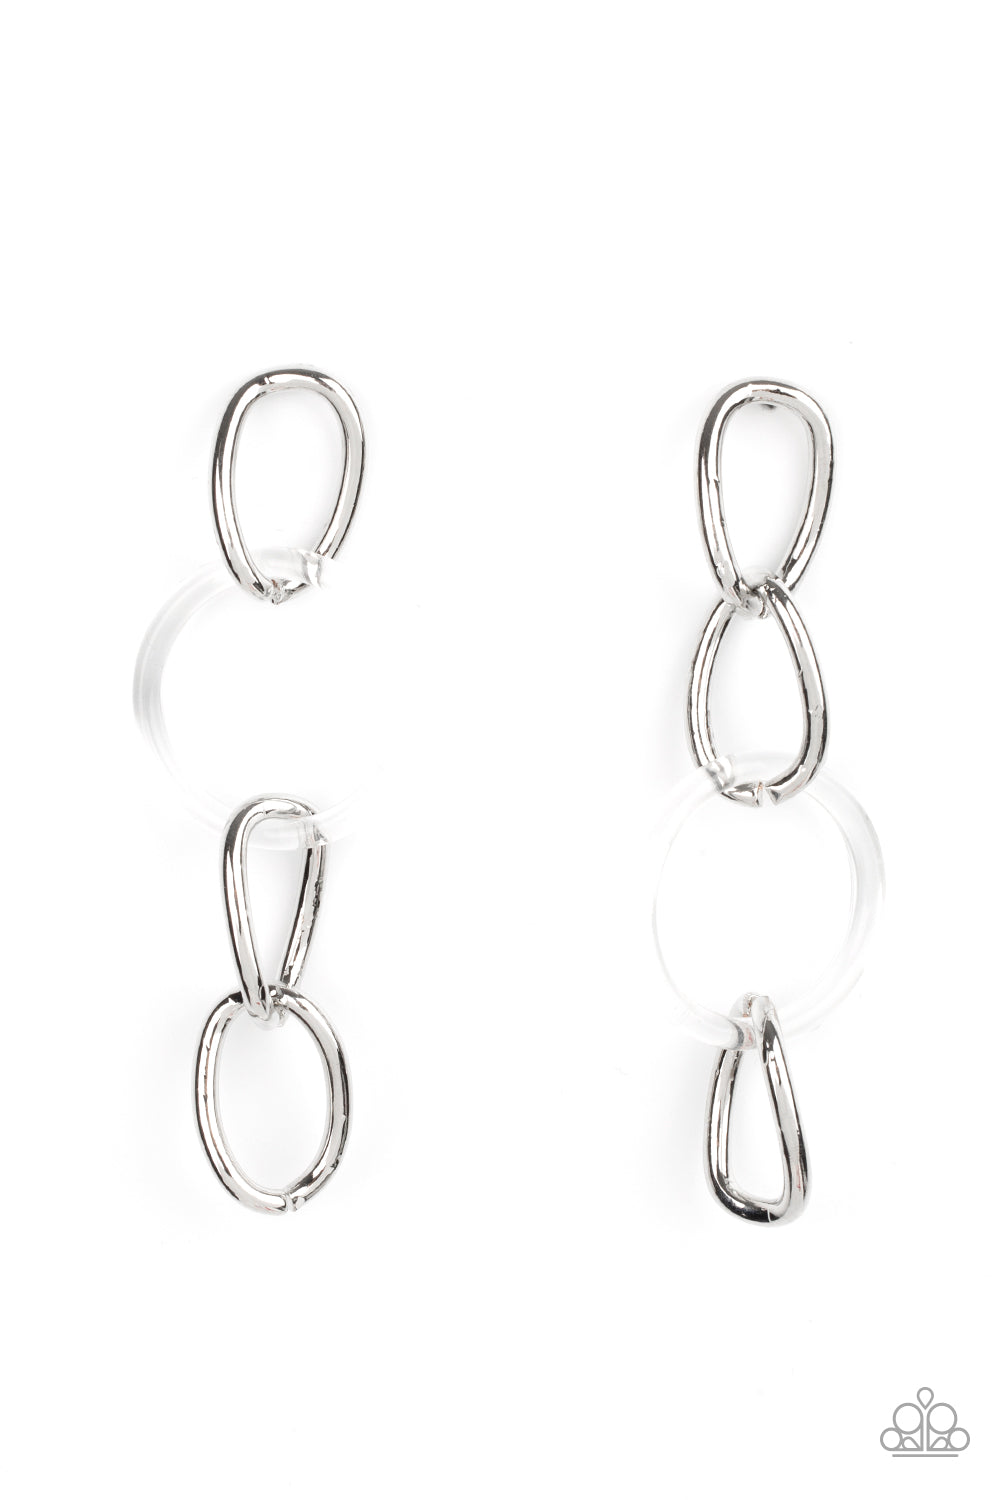 Paparazzi Accessories - Talk In Circles #E553 - White Earrings